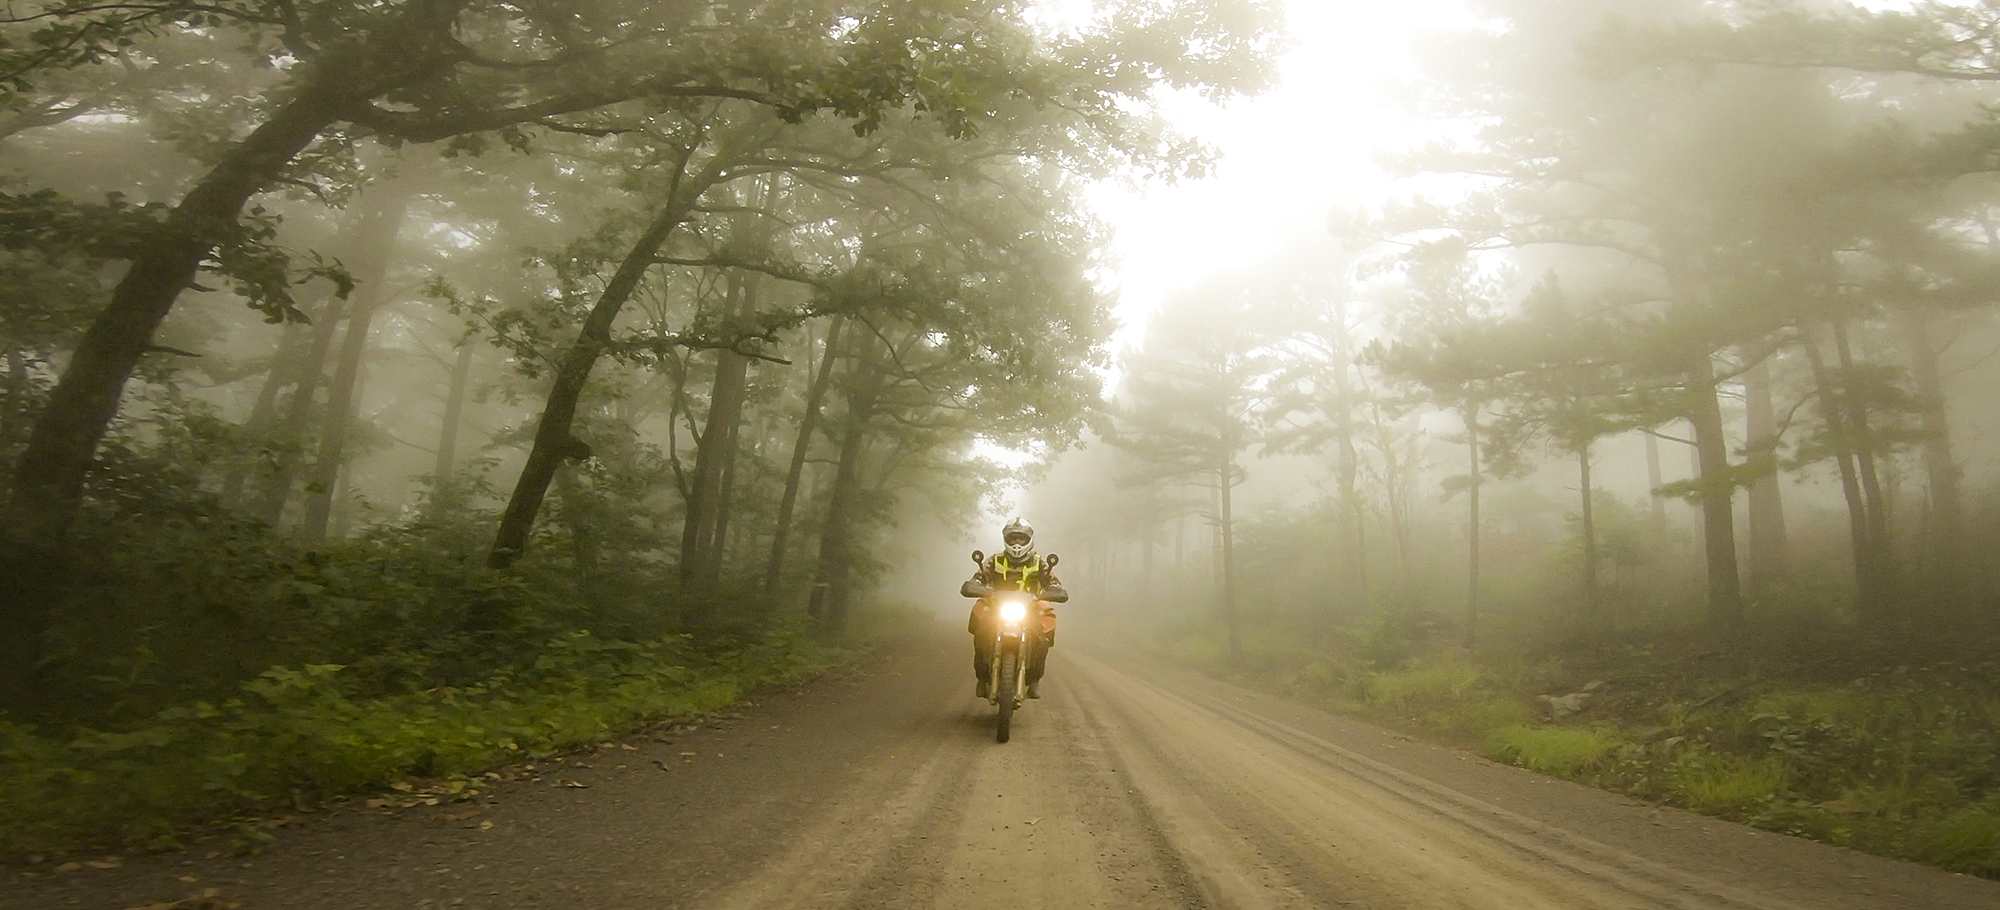 Motorcycling through the Ozark National Forest, Arkansas, on the Trans America Trail. This 5600 mile trail is a primarily off-road trail across the the United States starting at the Atlantic Ocean in North Carolina and ending in Oregon at the Pacific Ocean. 